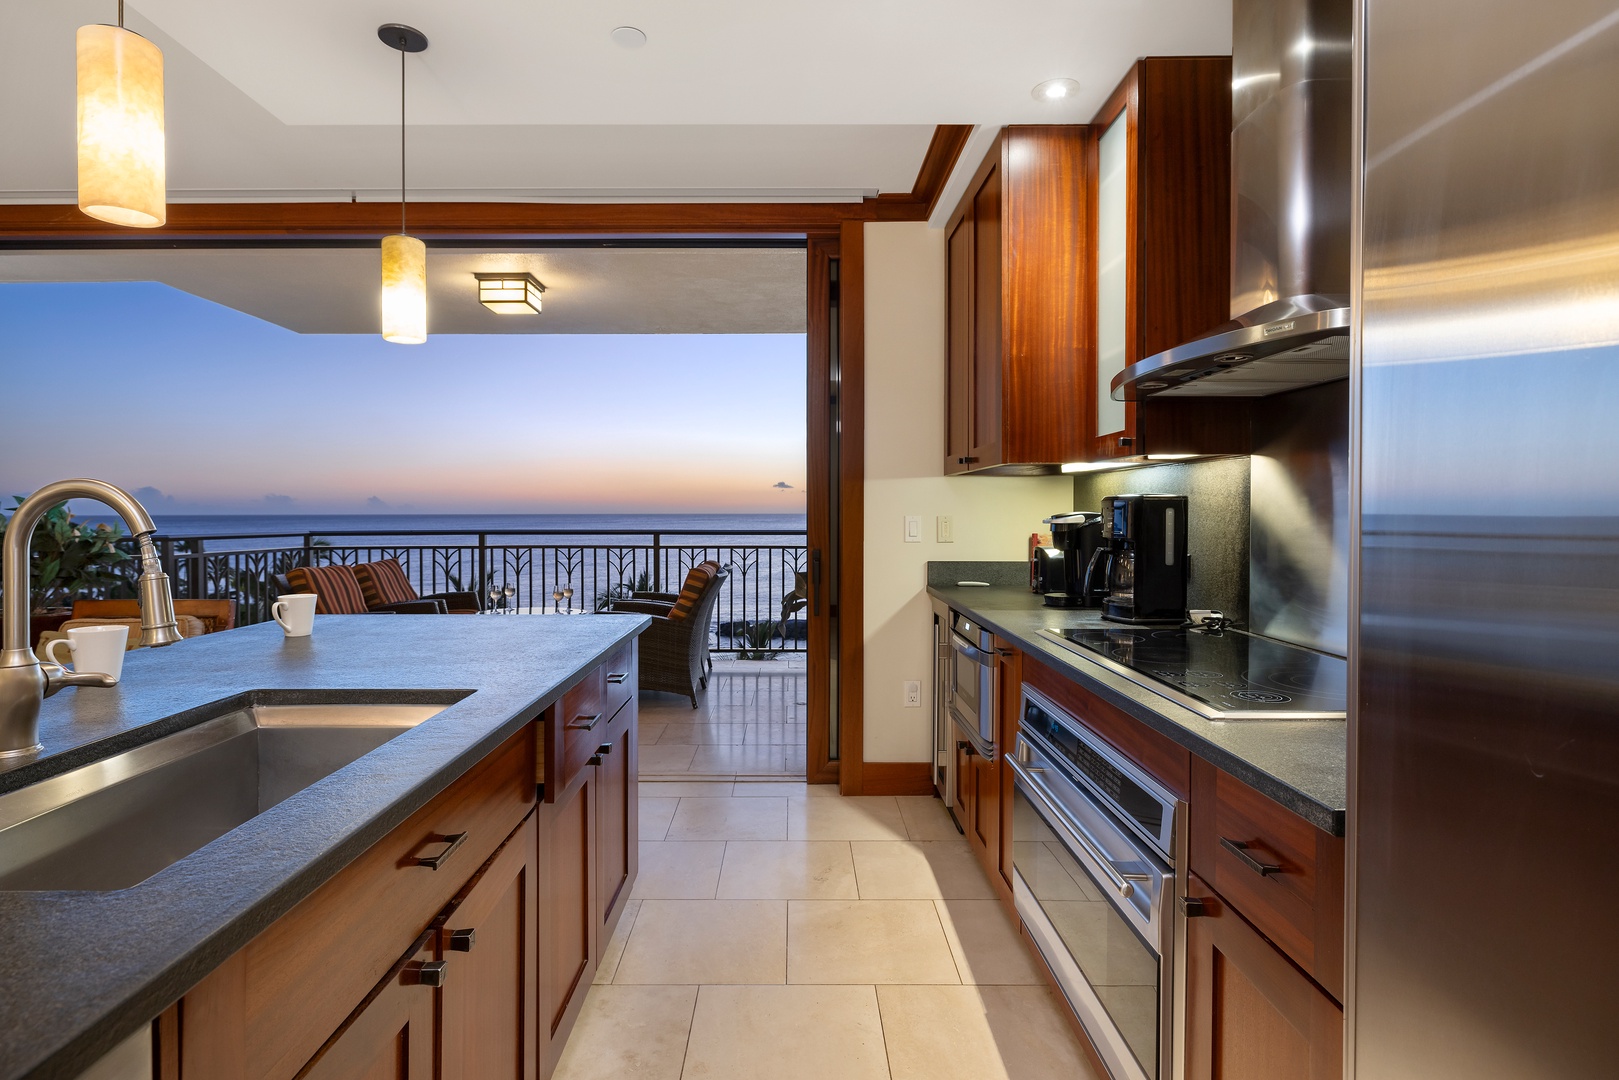 Kapolei Vacation Rentals, Ko Olina Beach Villas B610 - The kitchen with stainless steel appliances for a breezy meal prep.